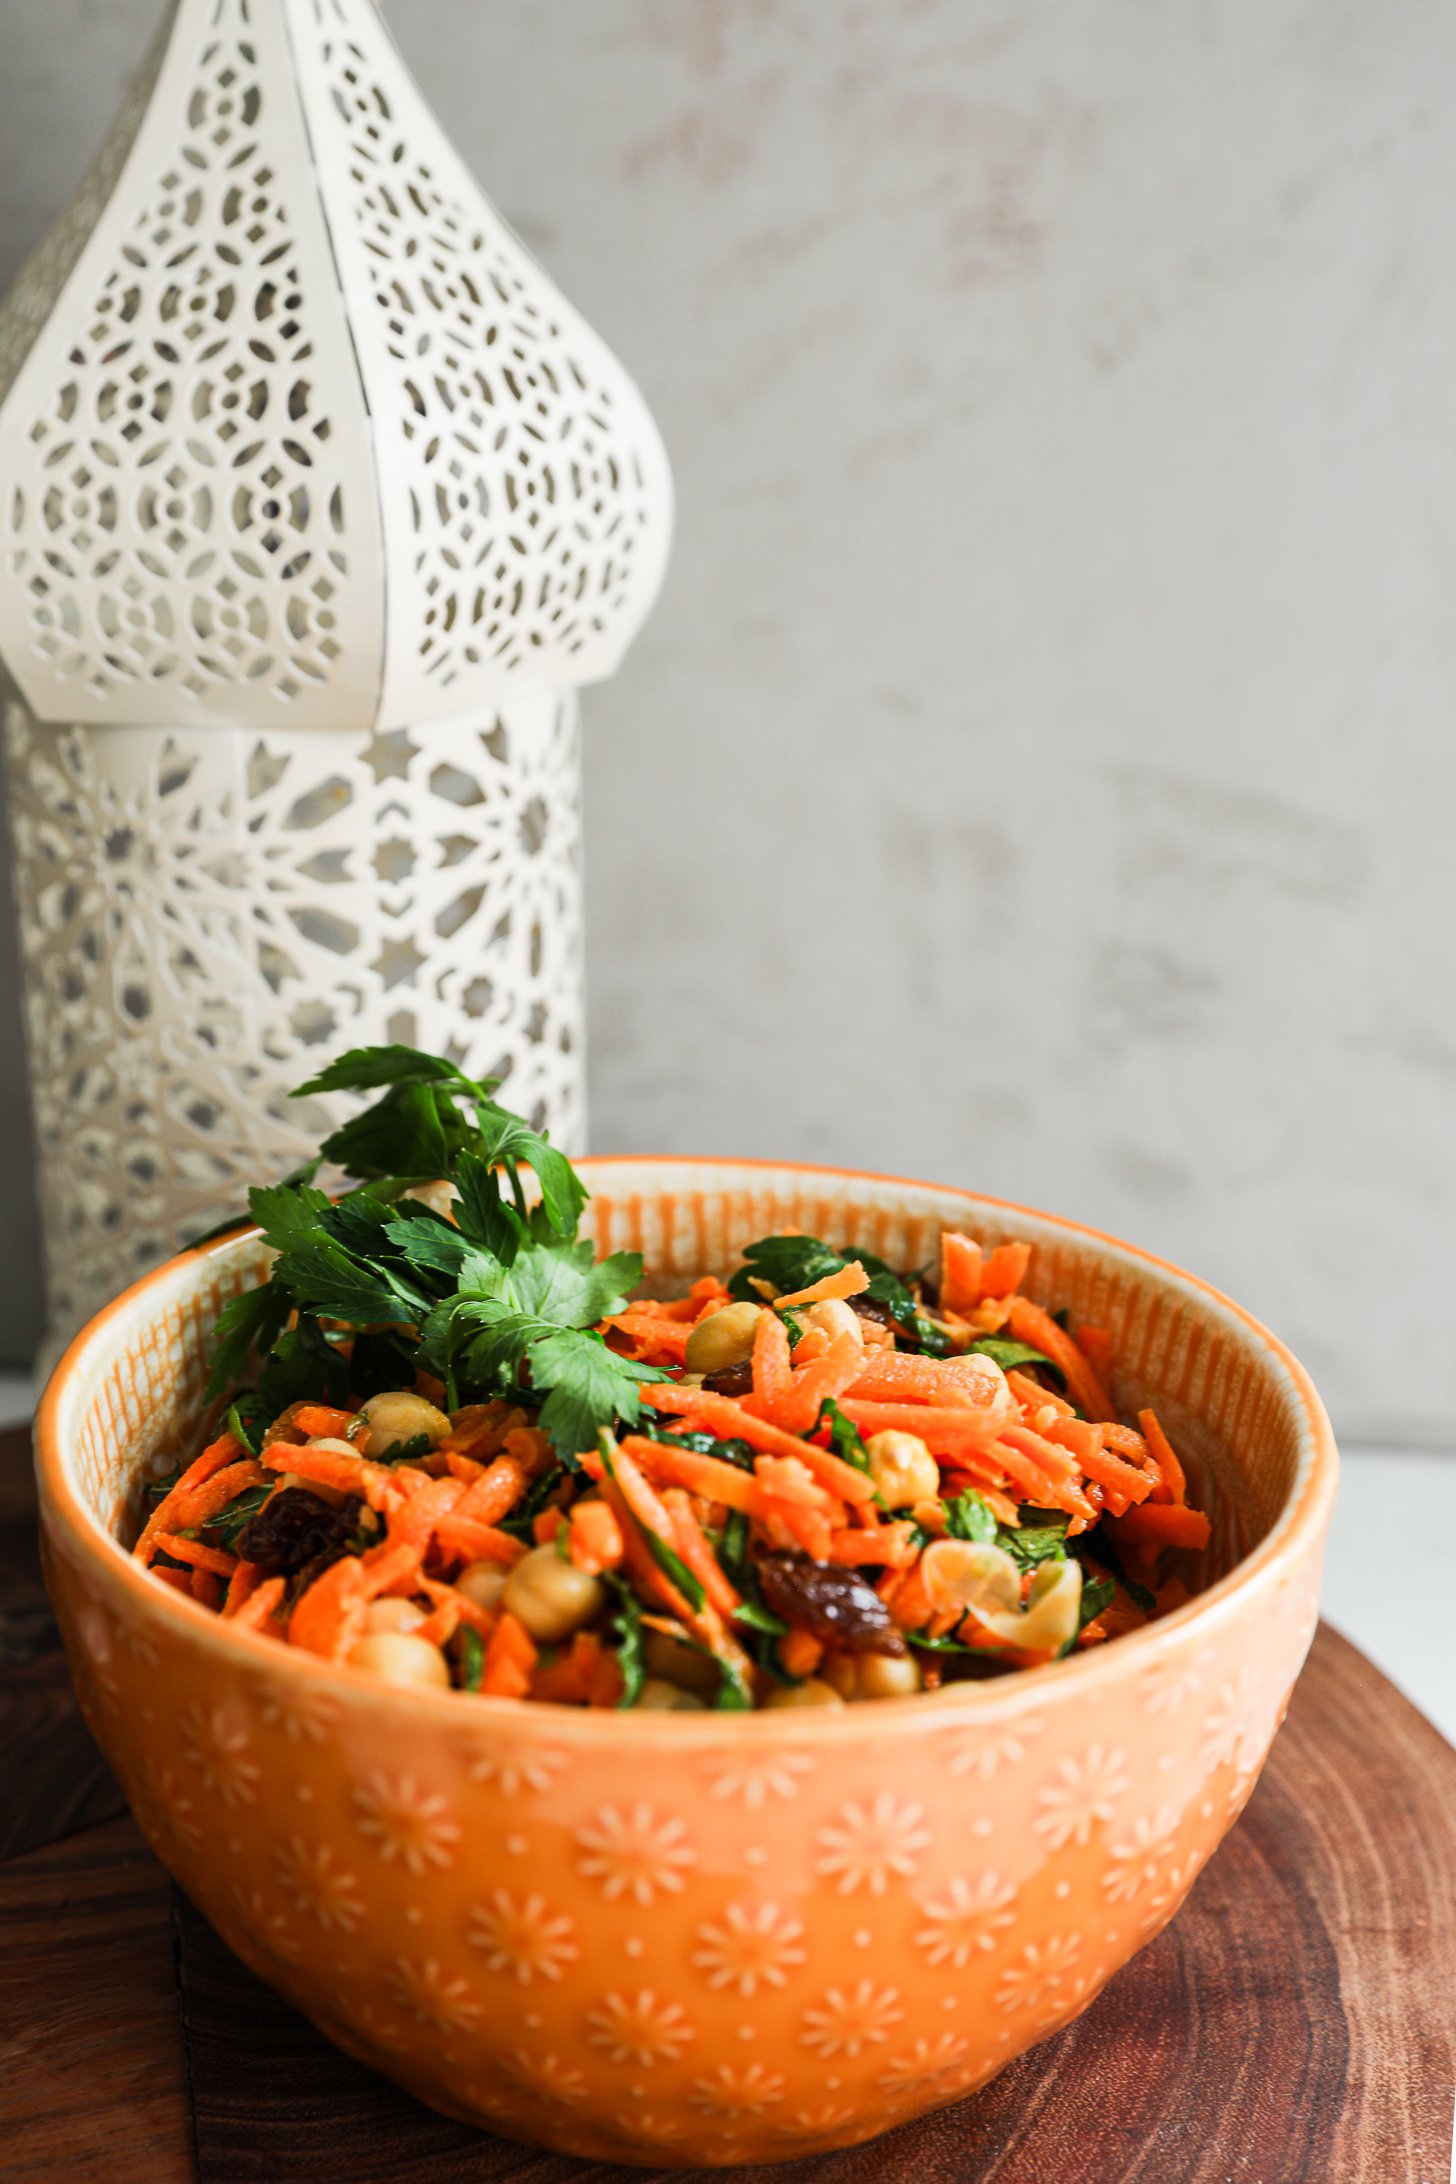 Perspective image of an orange bowl of grated carrot salad with raisins, chickpeas and herbs.